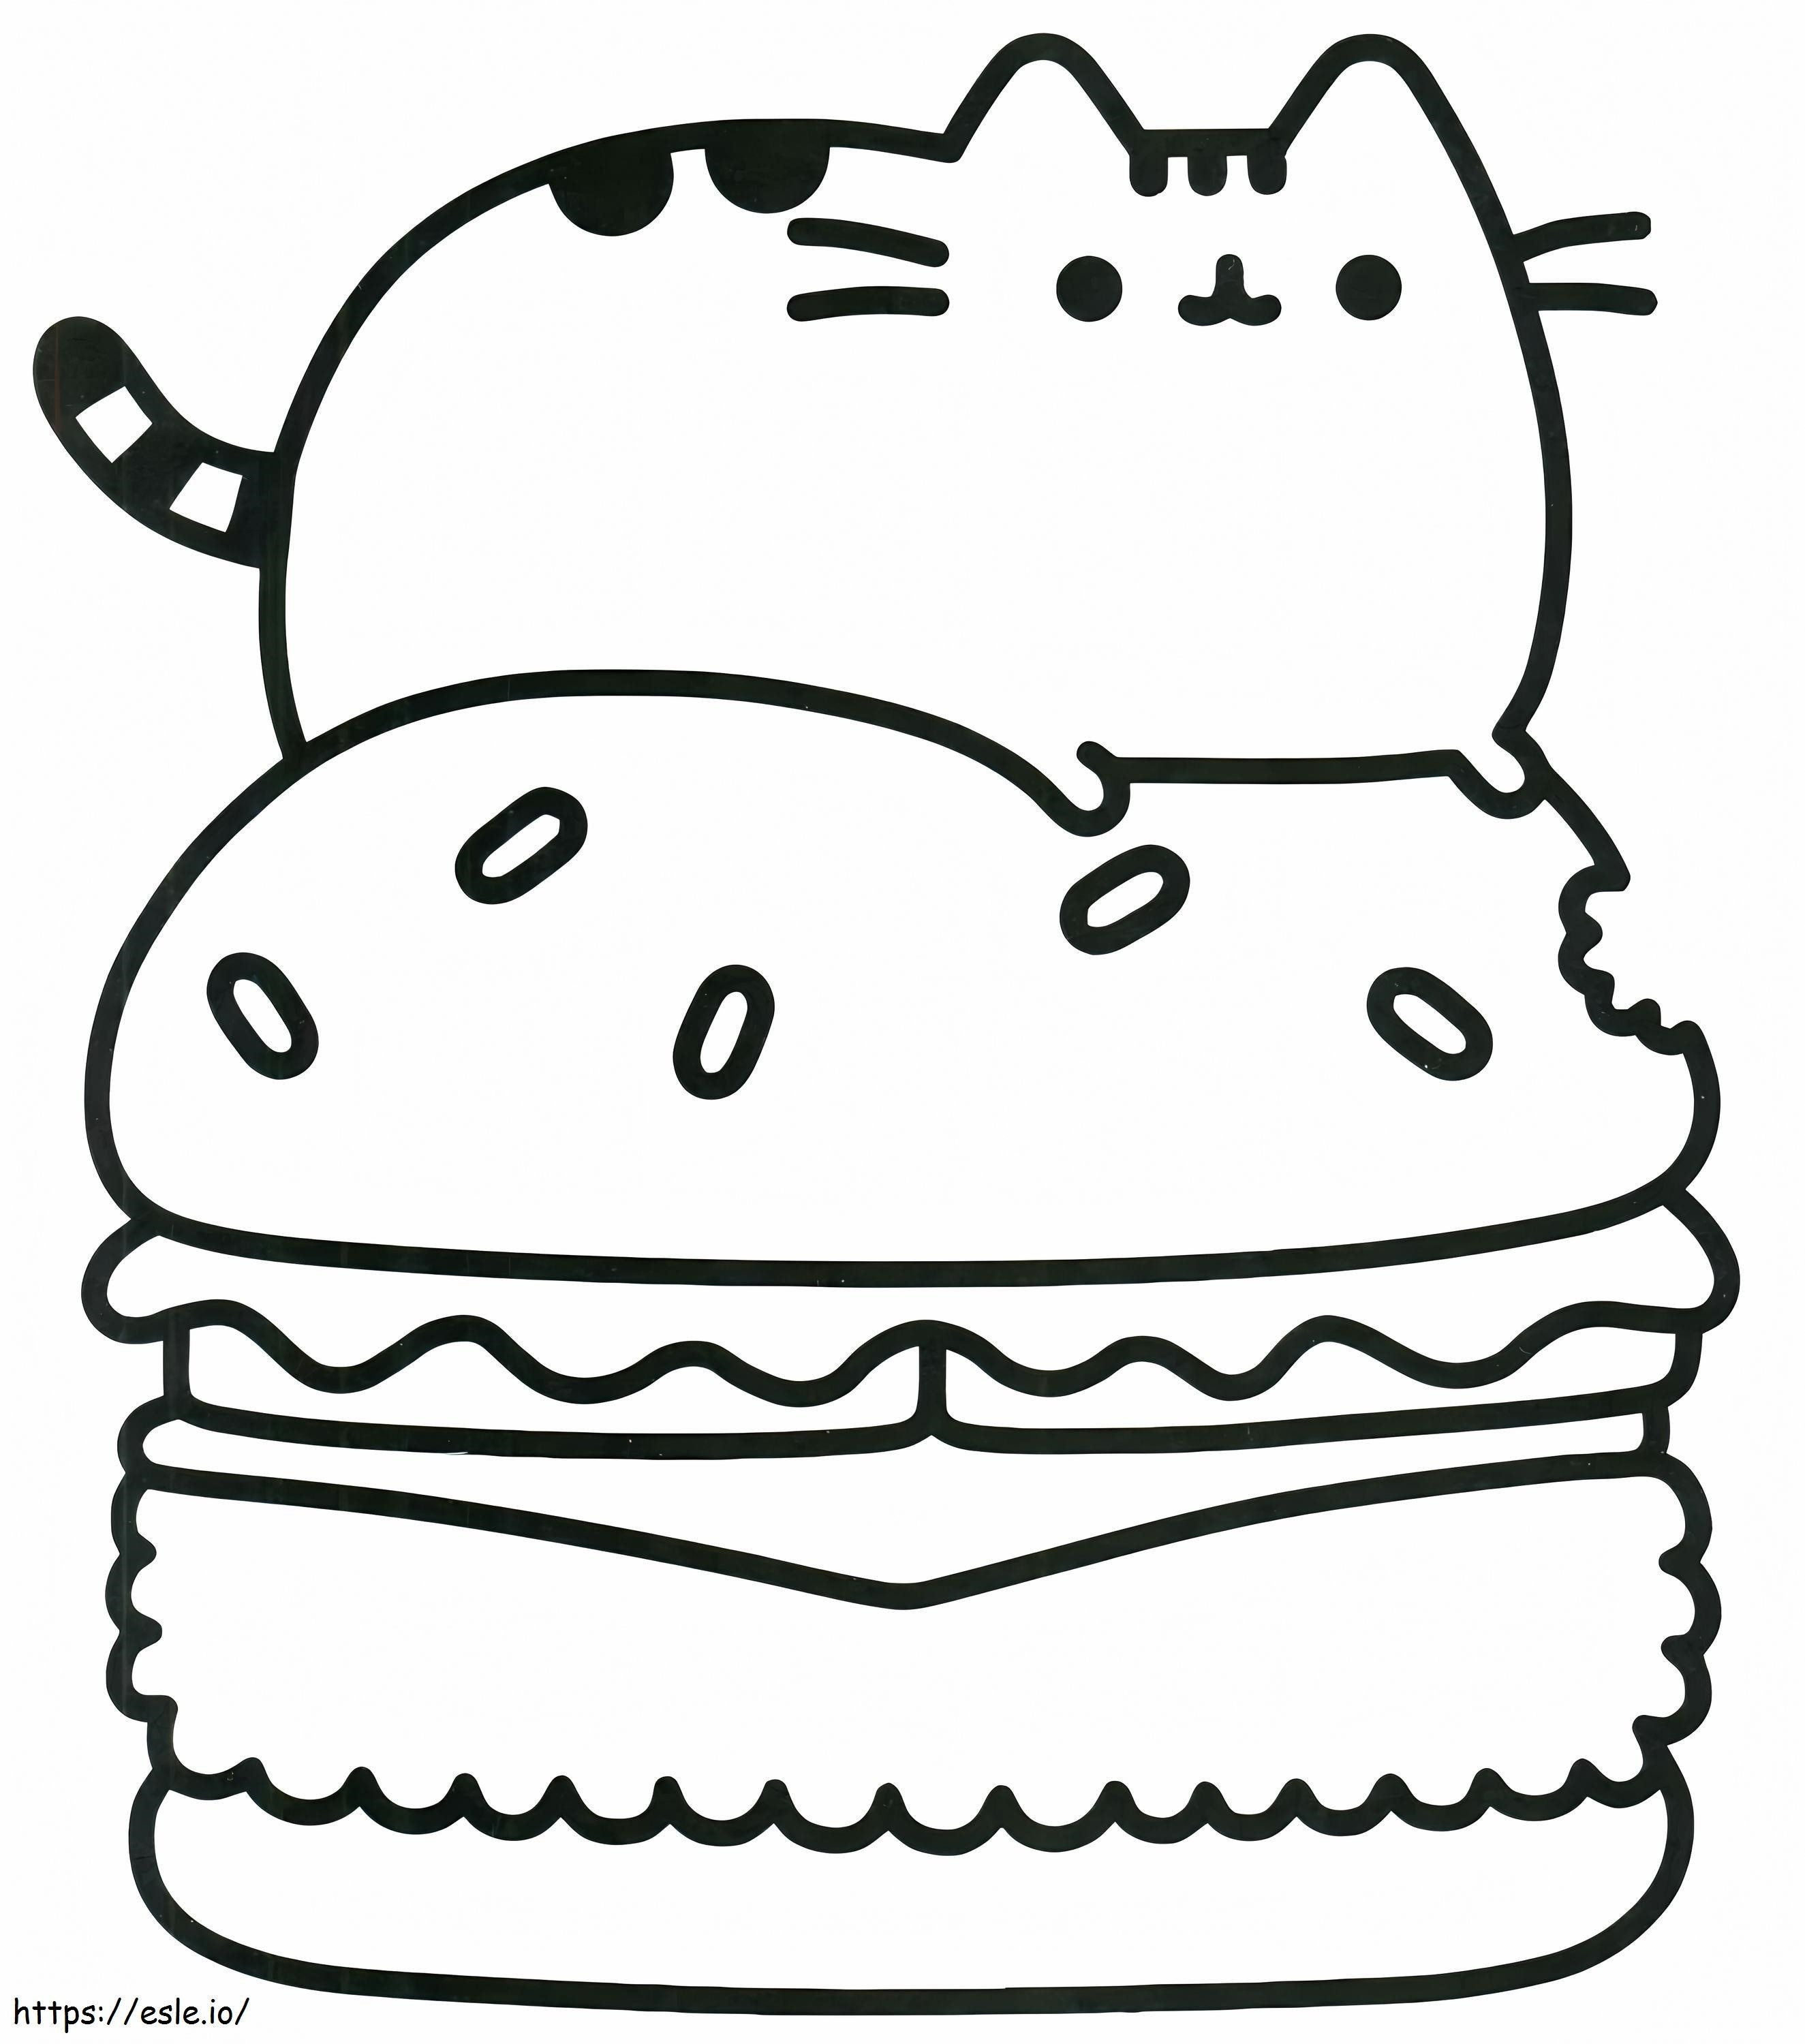 1528171659 Pusheen Cat 2 coloring page